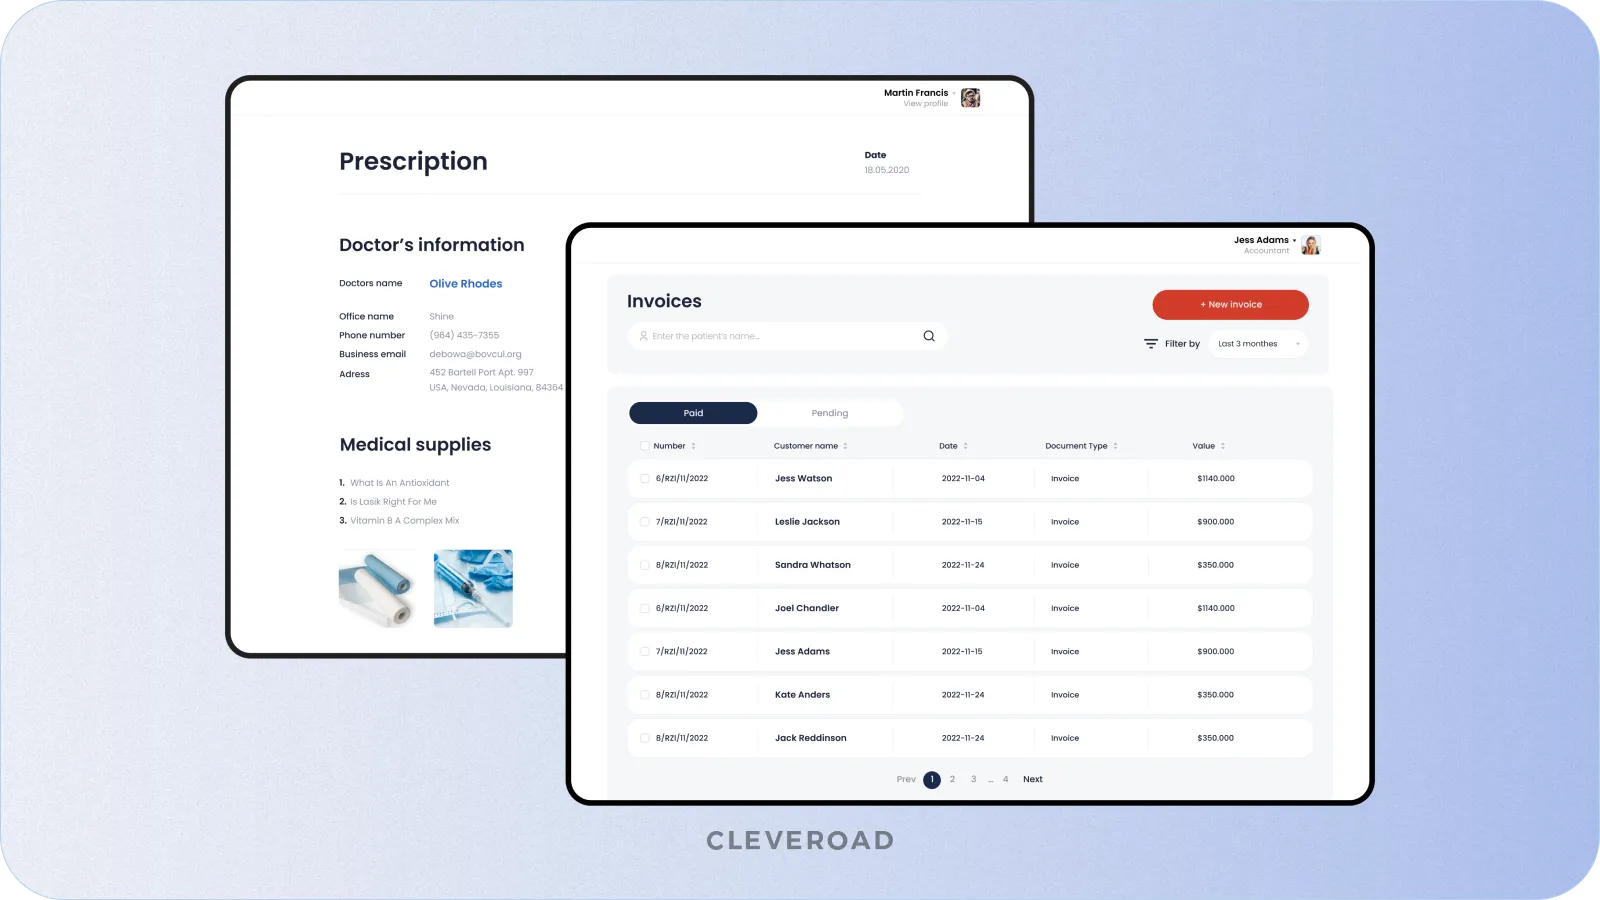 Clinic Management System by Cleveroad